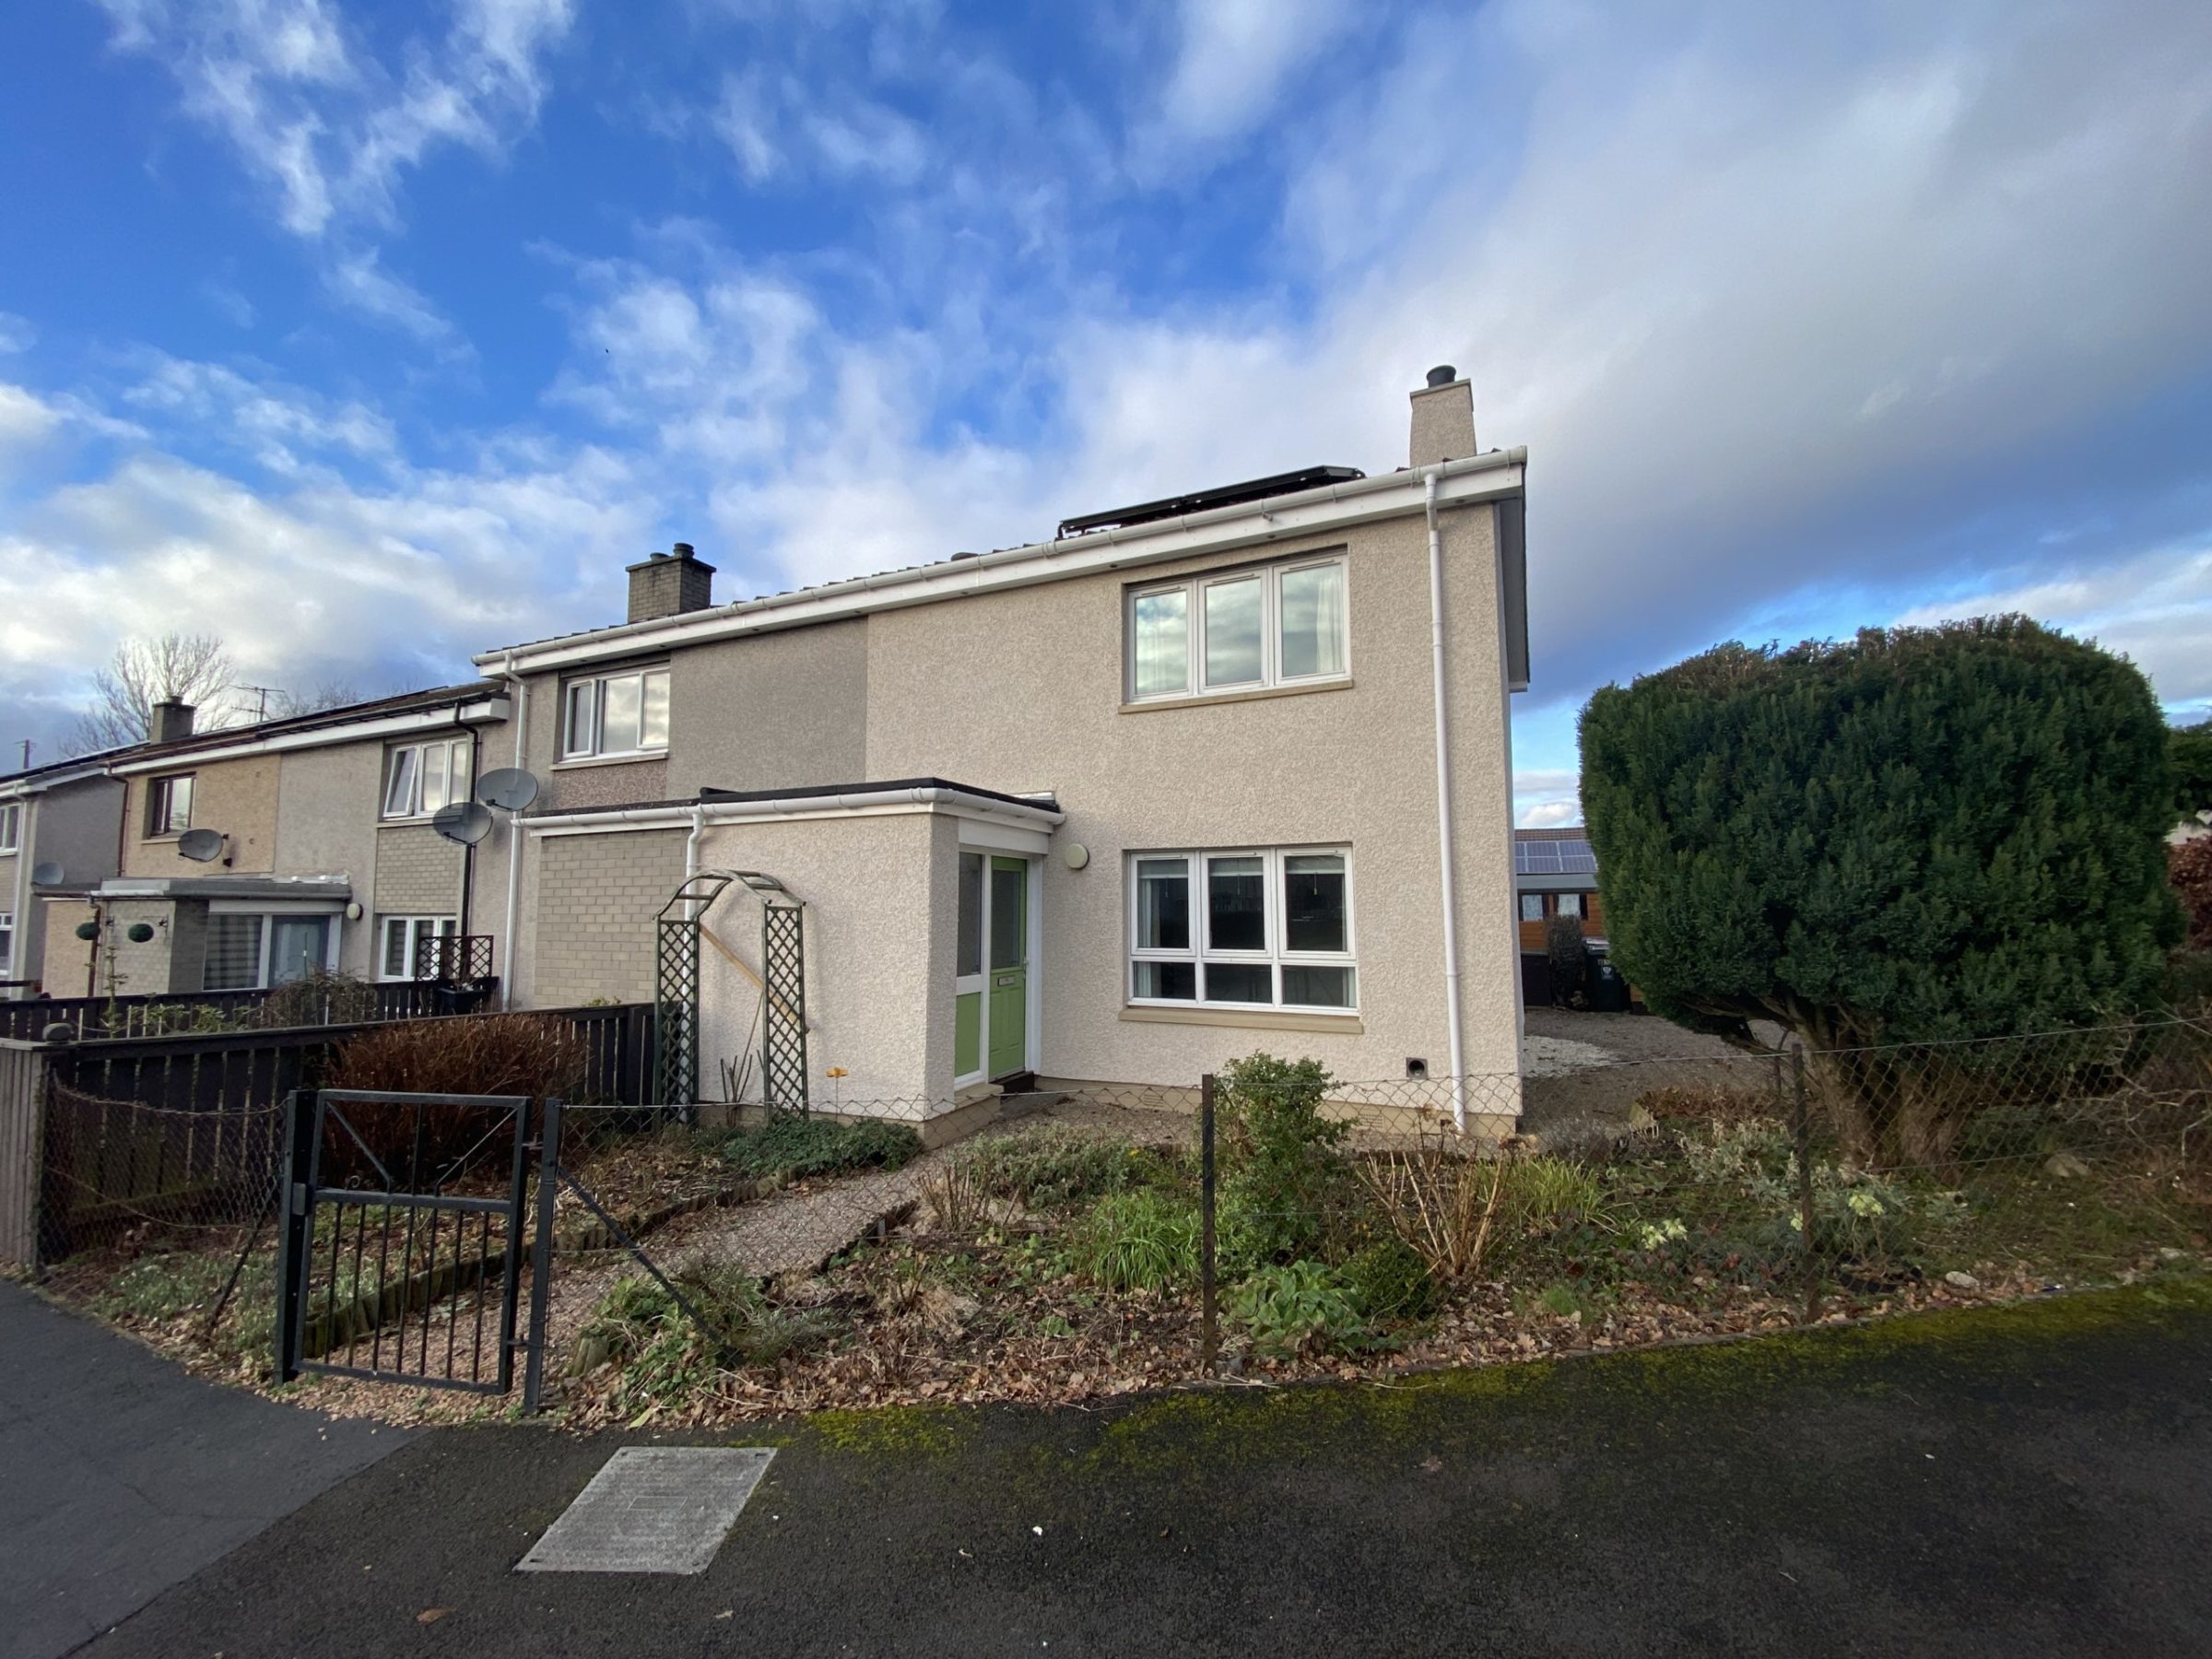 2 Bed End-Terraced House – Isla Road, Luncarty